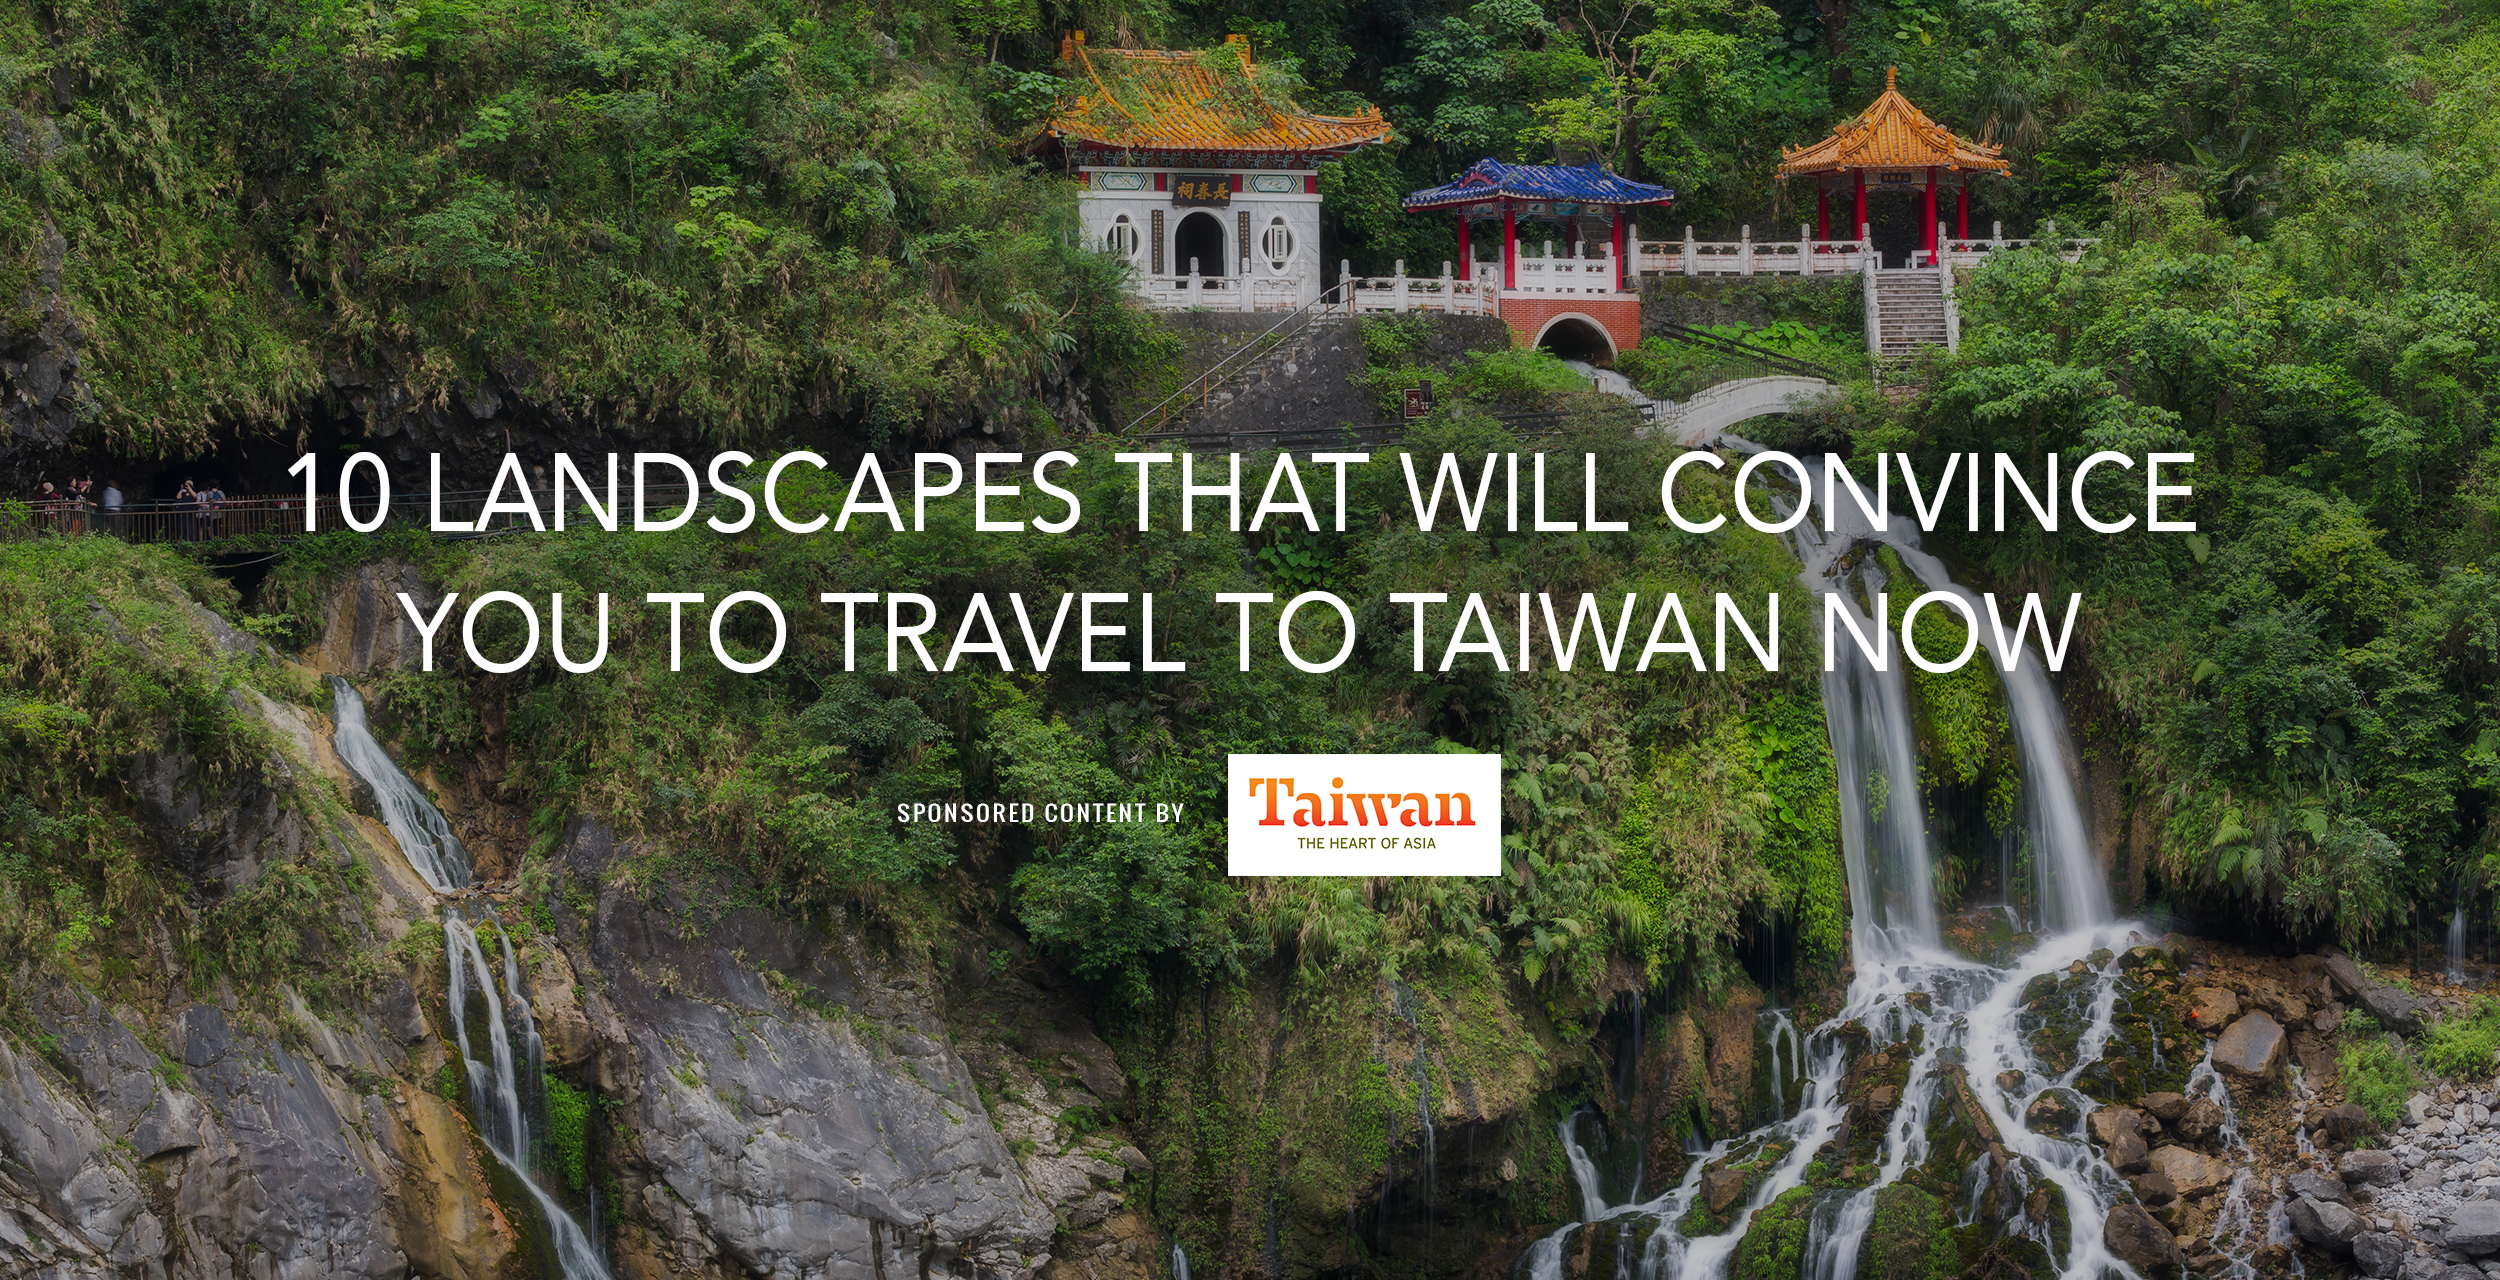 10 Landscapes That Will Convince You to Travel to Taiwan Now ...